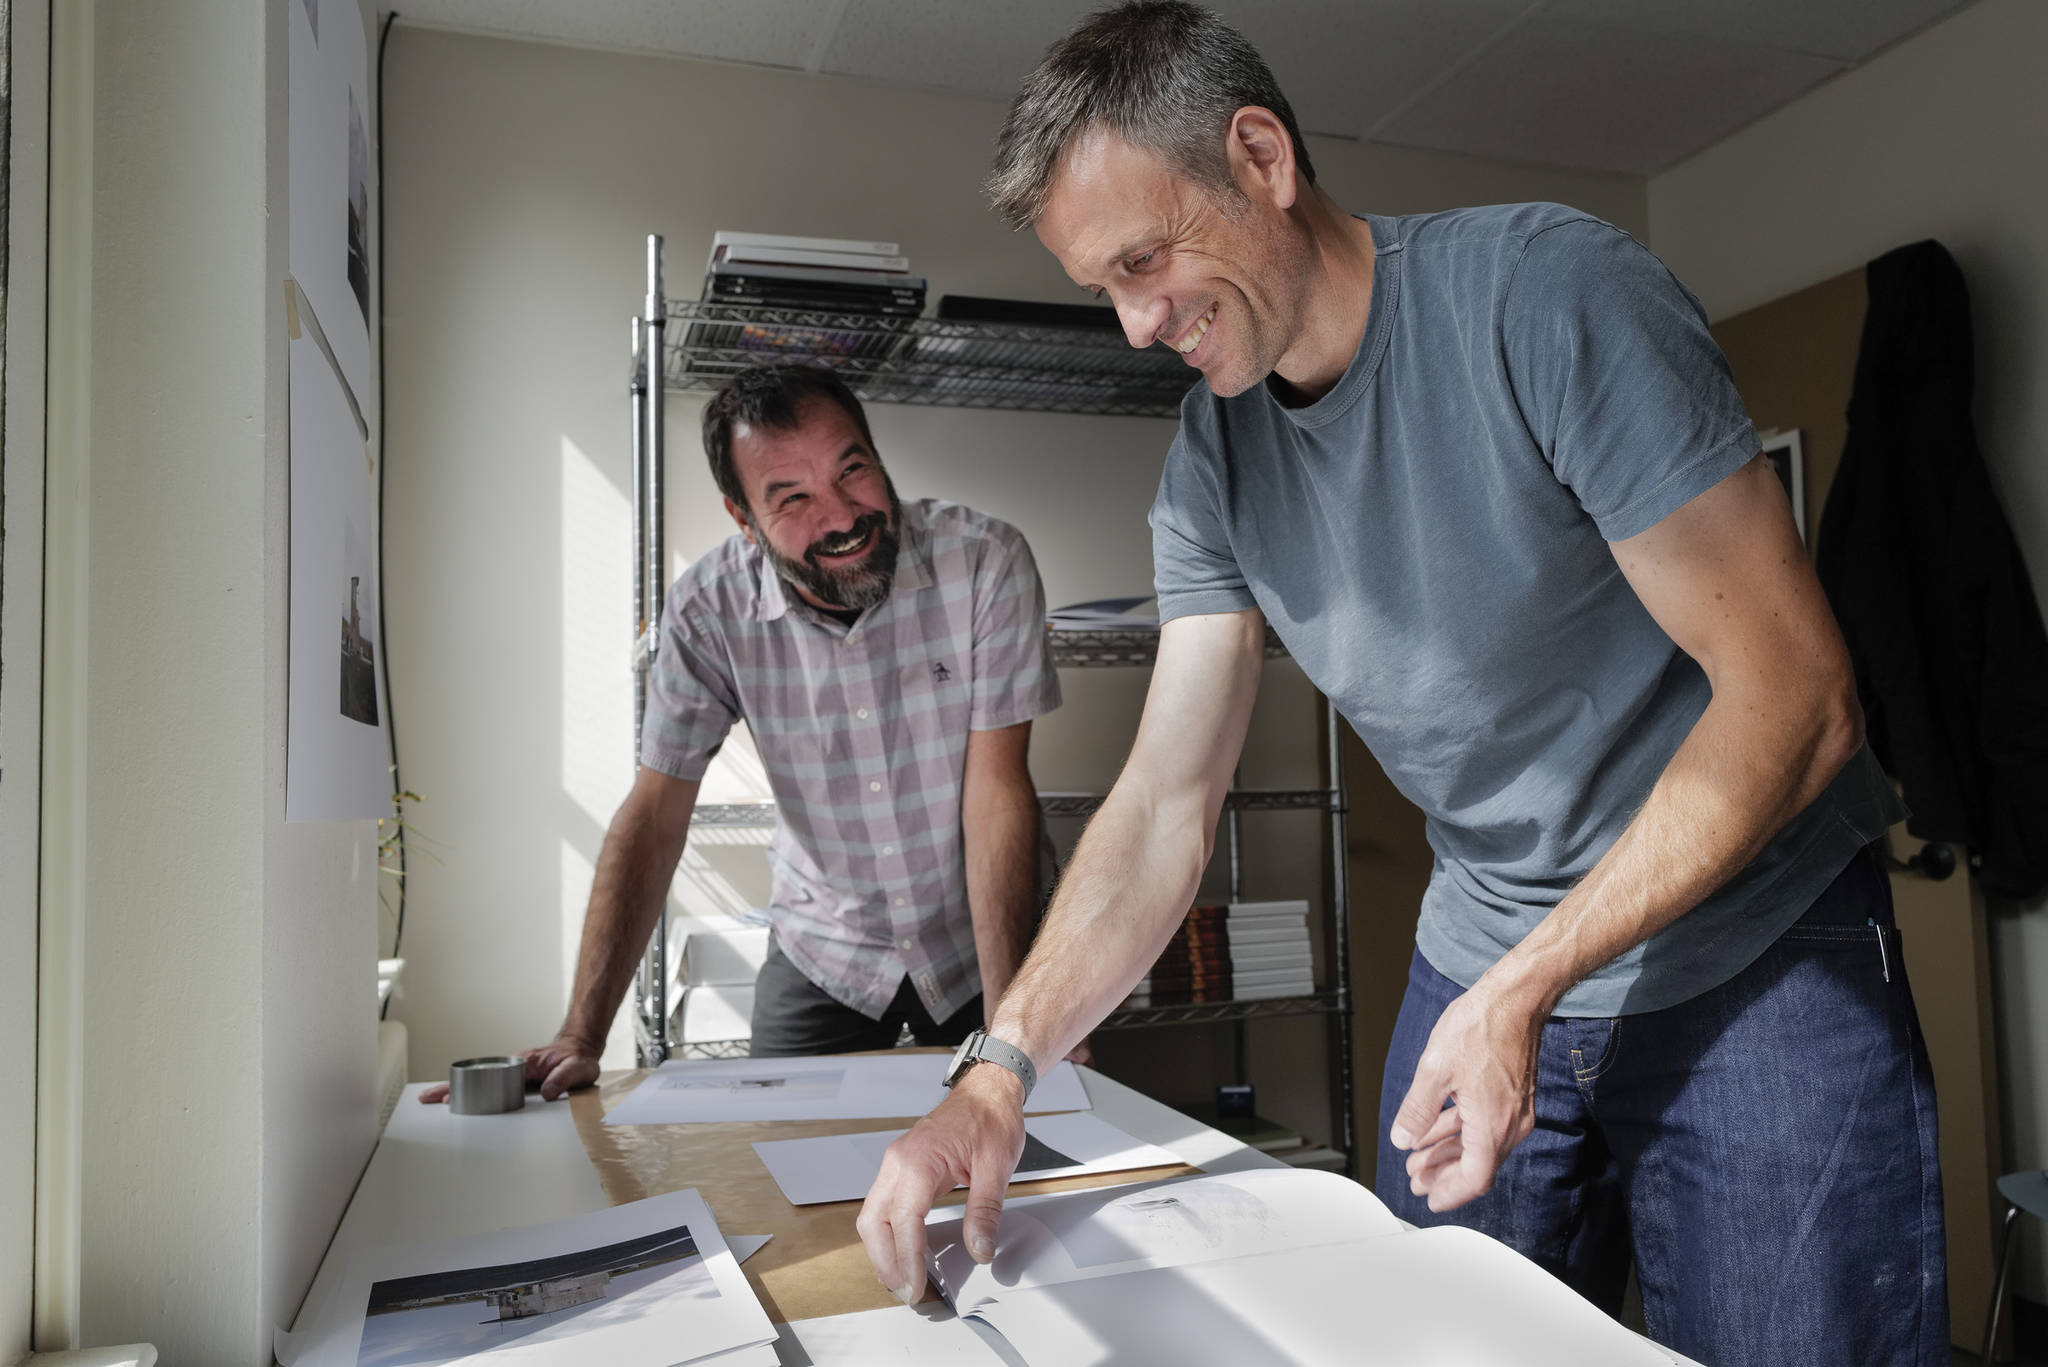 Seattle-based photographer Eirik Johnson, left, works with Ben Huff, a local photographer and editor of Ice Fog Press, on a hand-made book of Johnson’s photographs titled “Barrow Cabins” on Wednesday, Aug. 21, 2019. (Michael Penn | Juneau Empire)